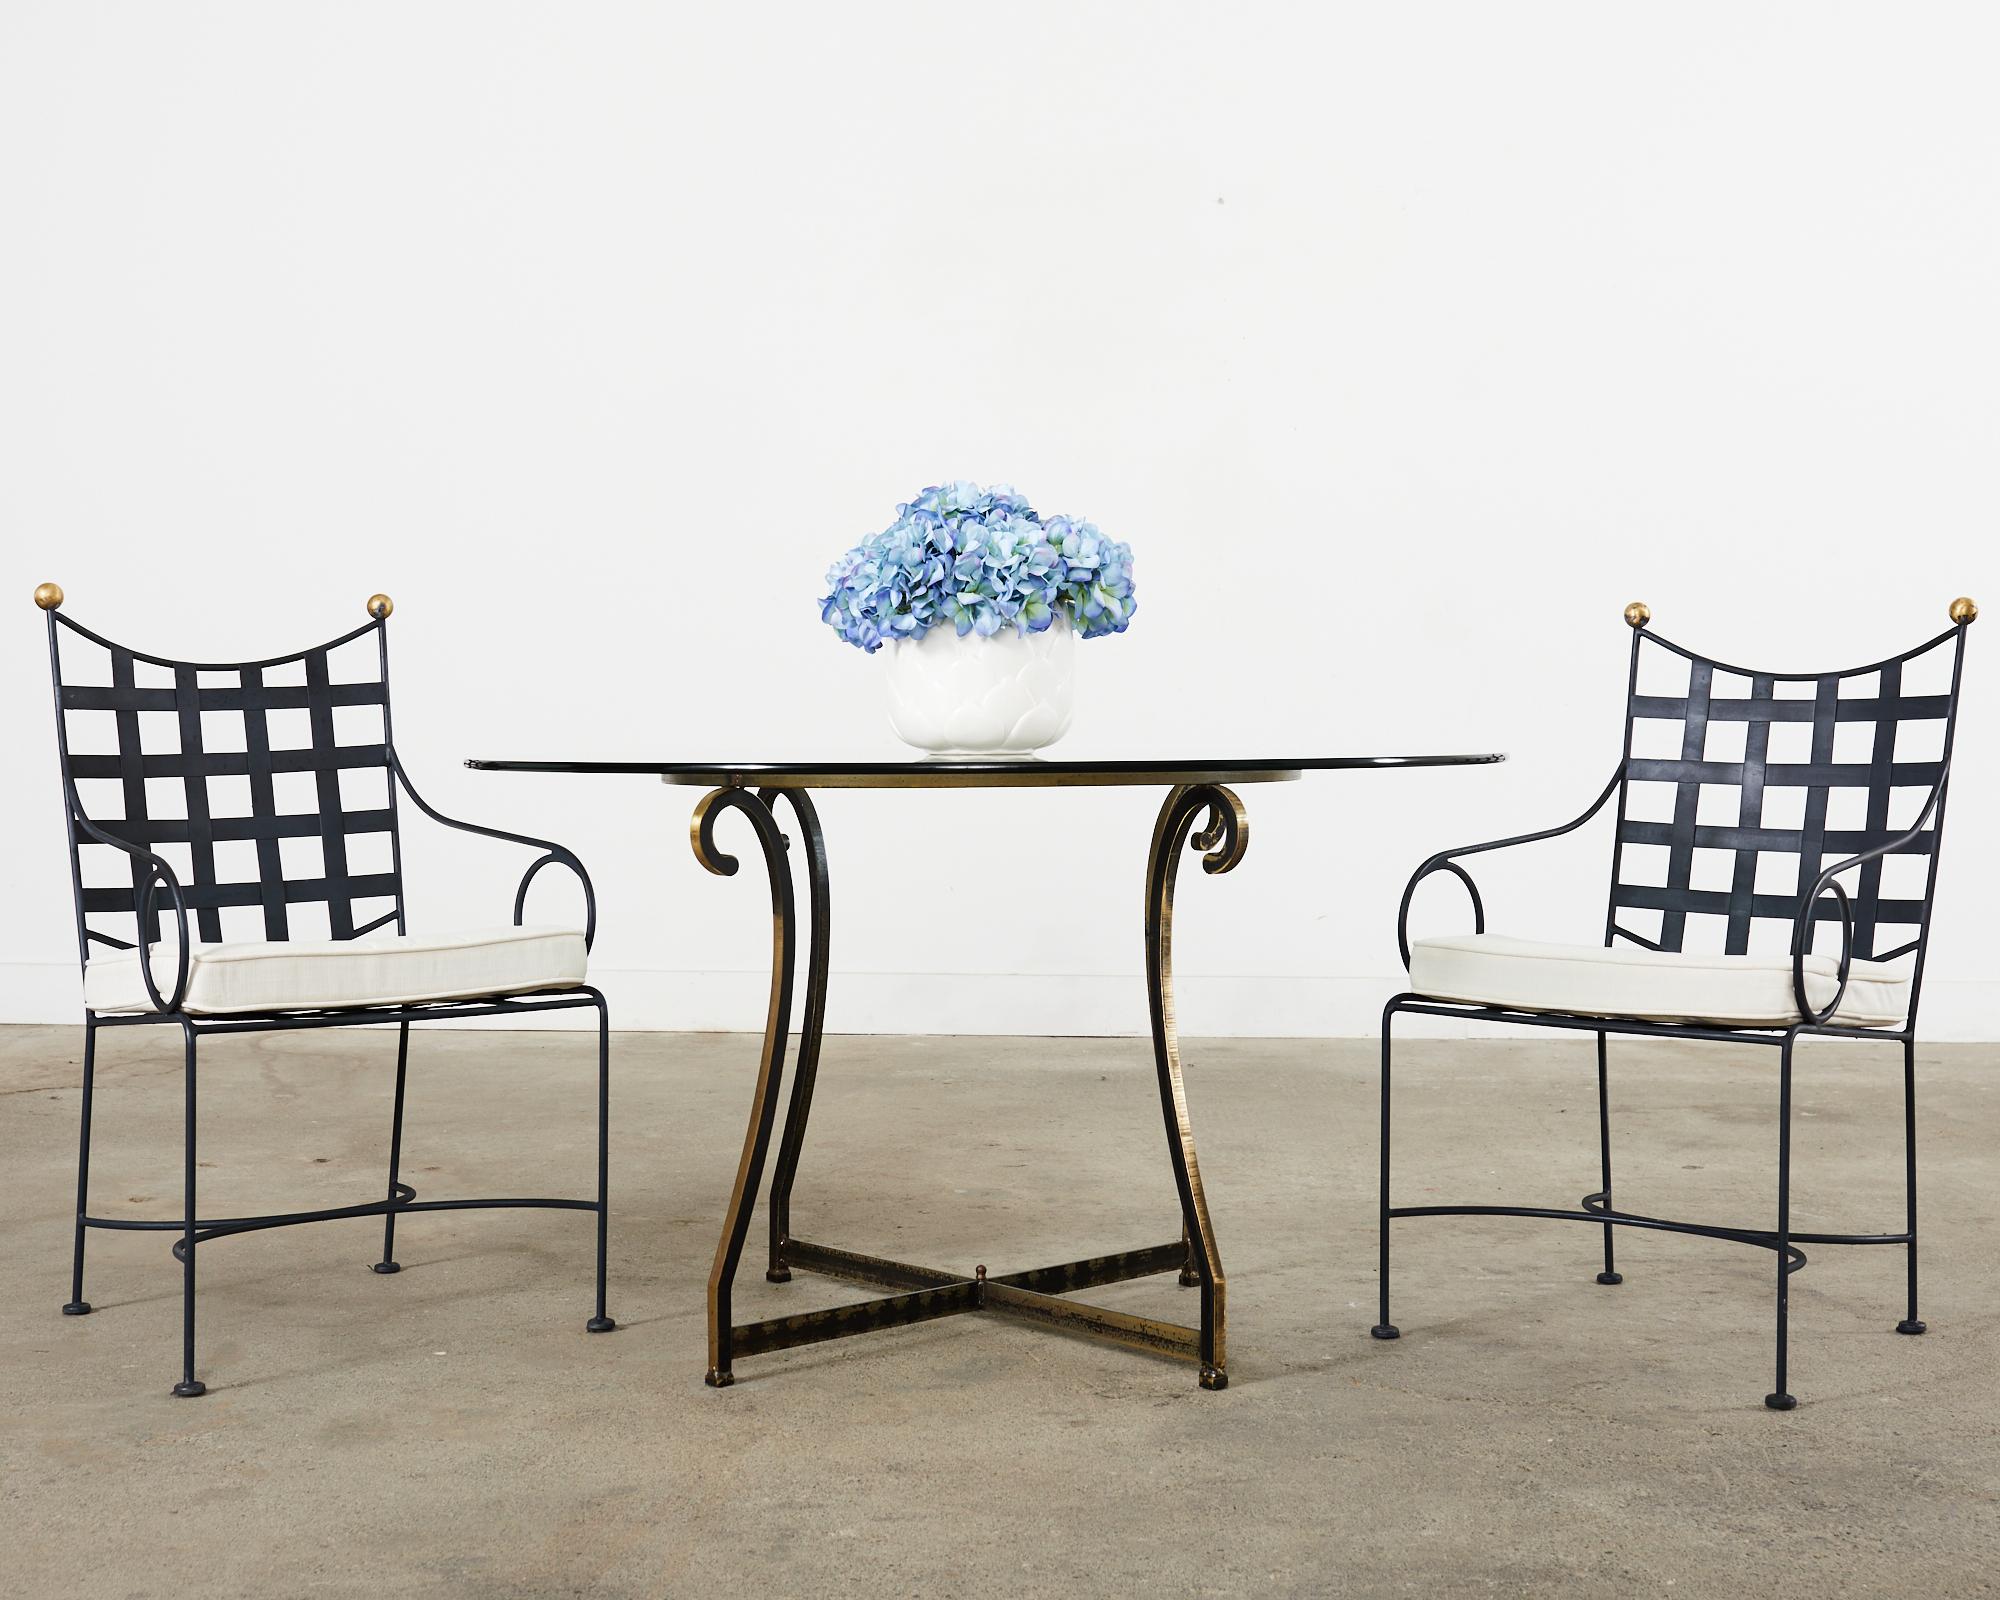 Iconic mid-century modern set of four patio and garden dining armchairs made in the style and manner of Mario Papperzini for John Salterini. The chairs feature wrought iron frames with lattice seats and backs in the neoclassical style topped with